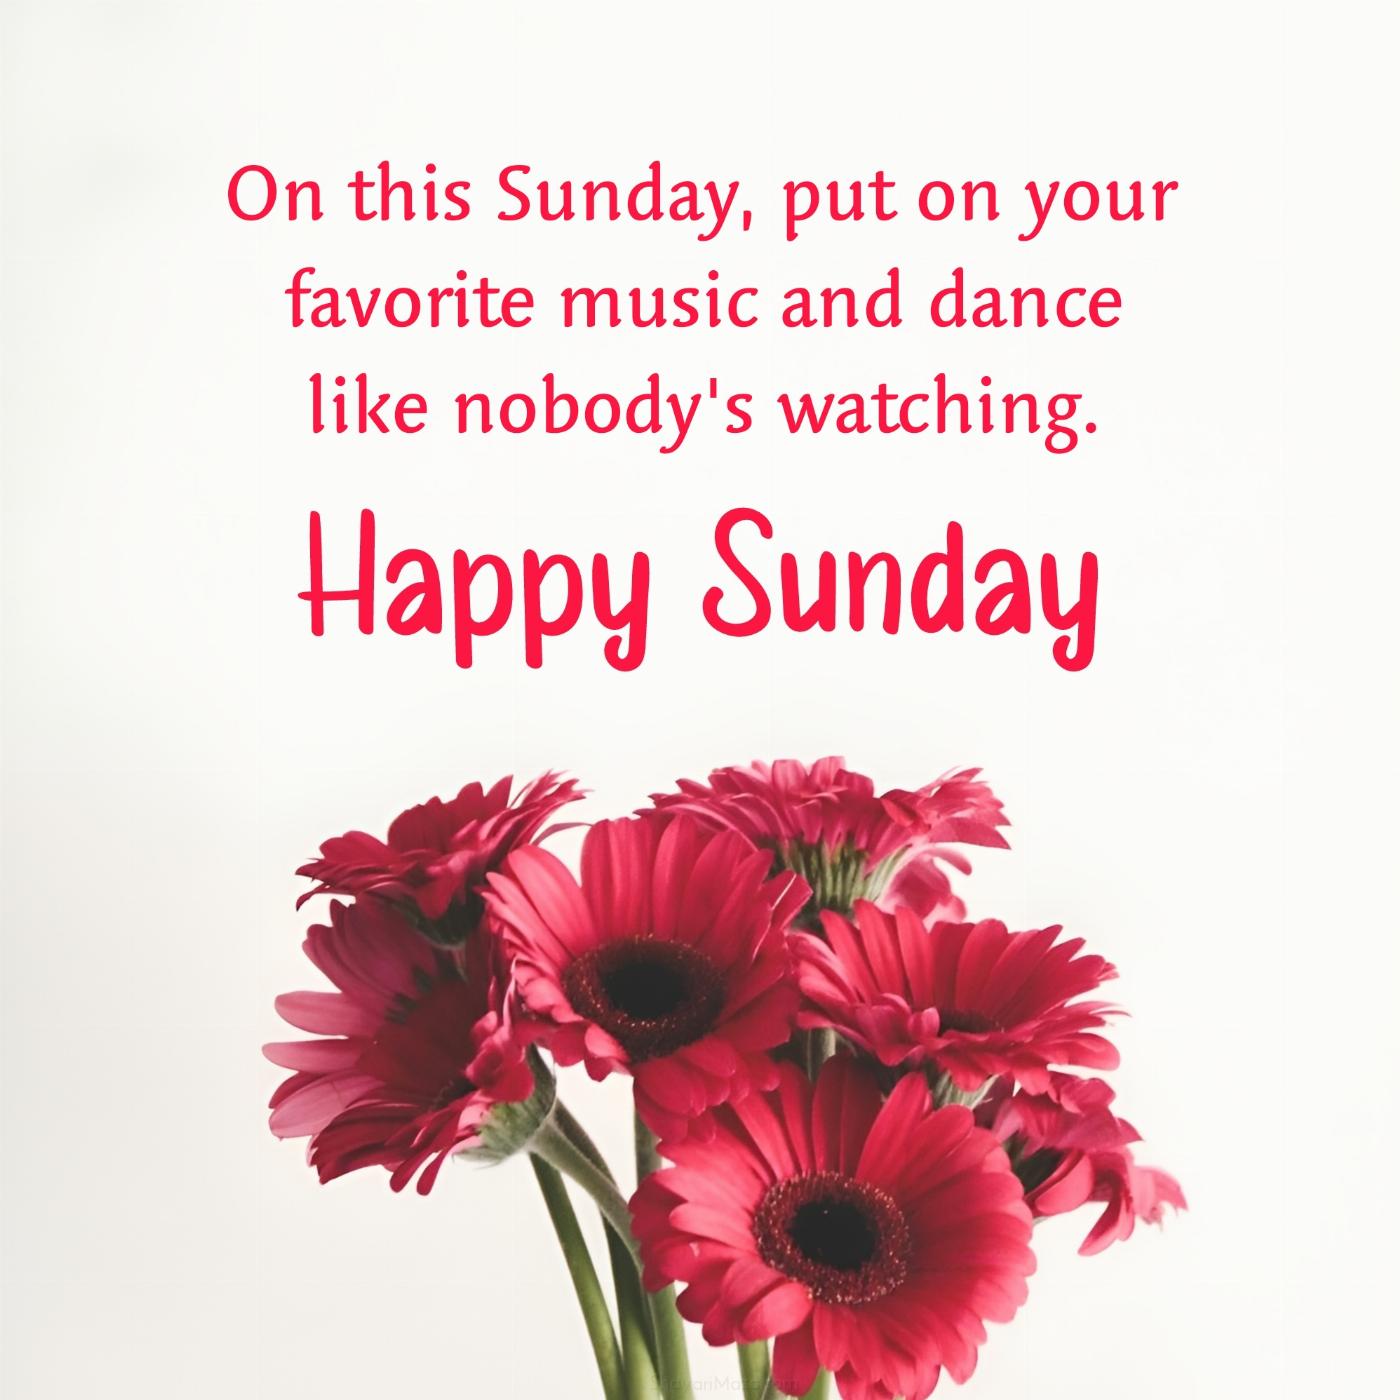 On this Sunday put on your favorite music